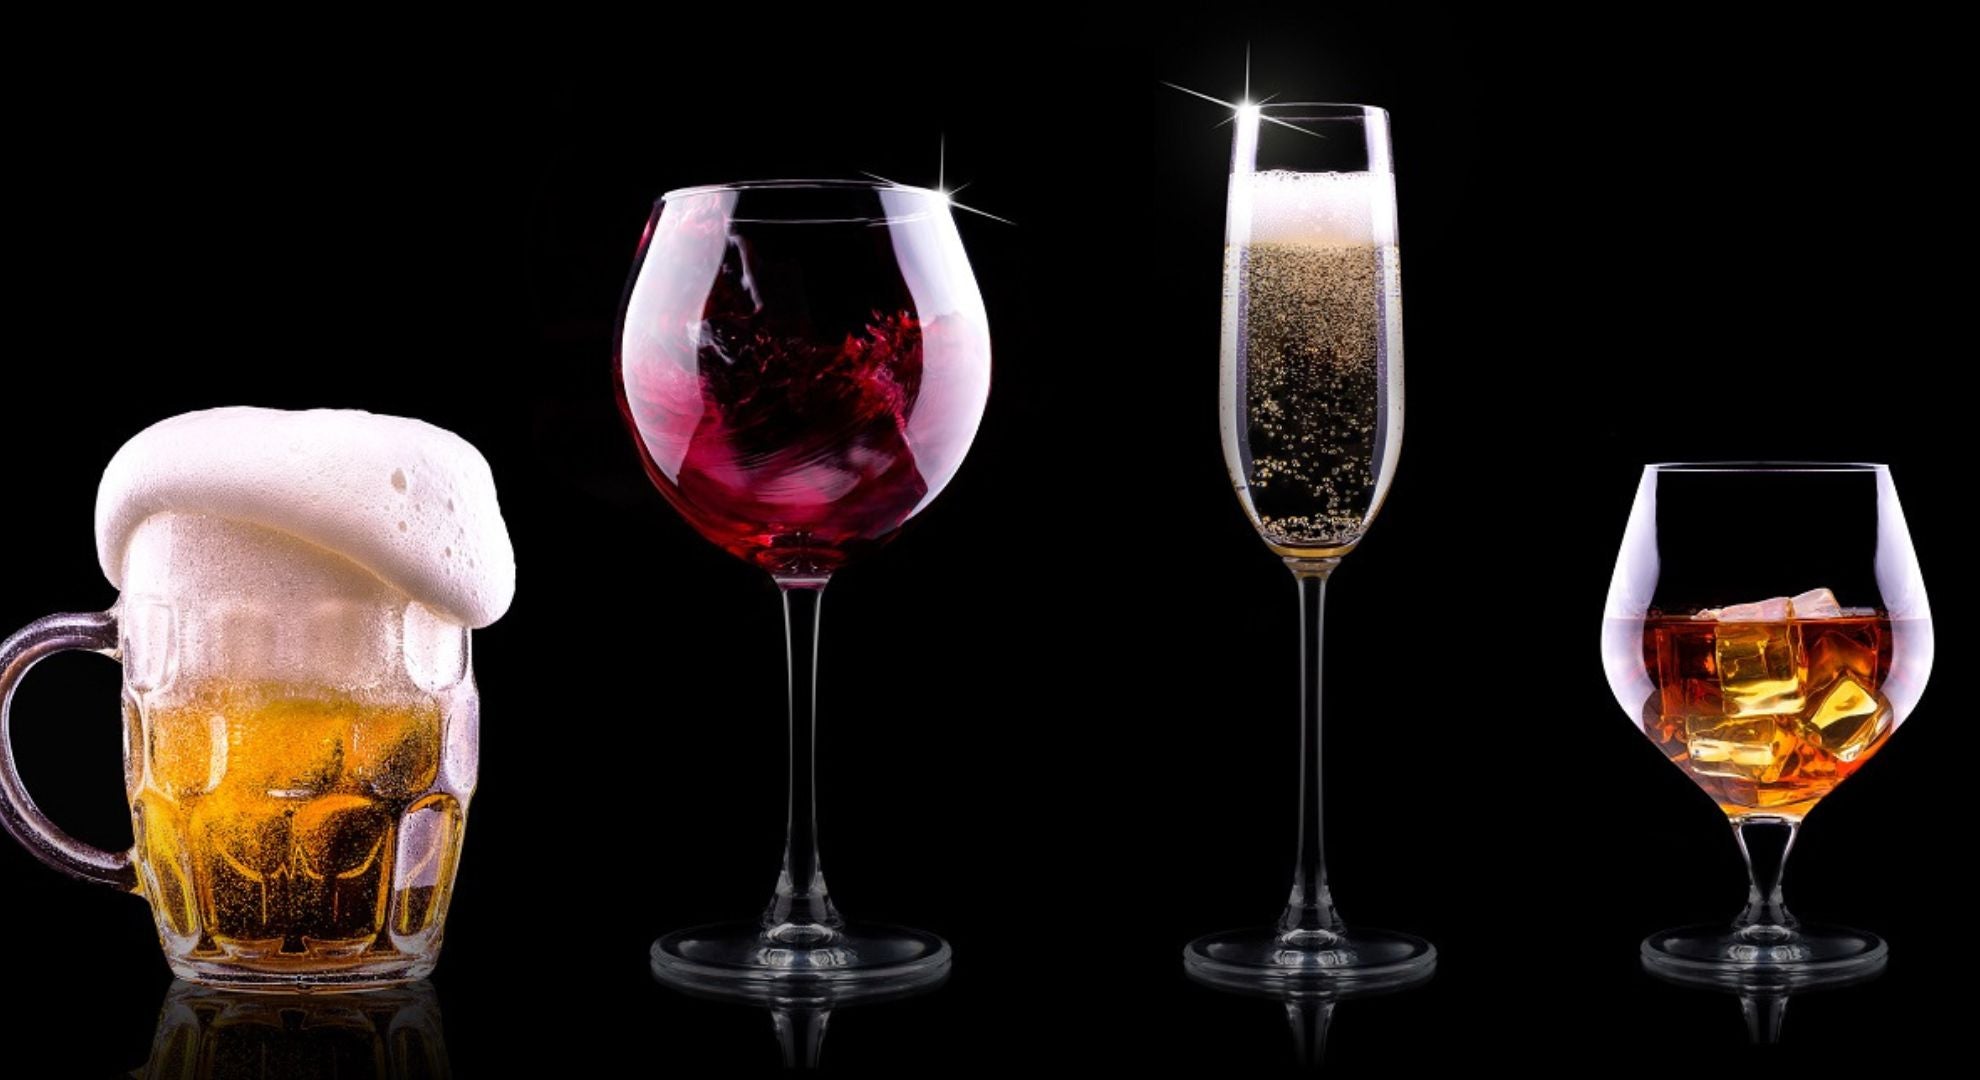 How Do Different Wine and Spirits Varieties Differ in Taste and Aroma